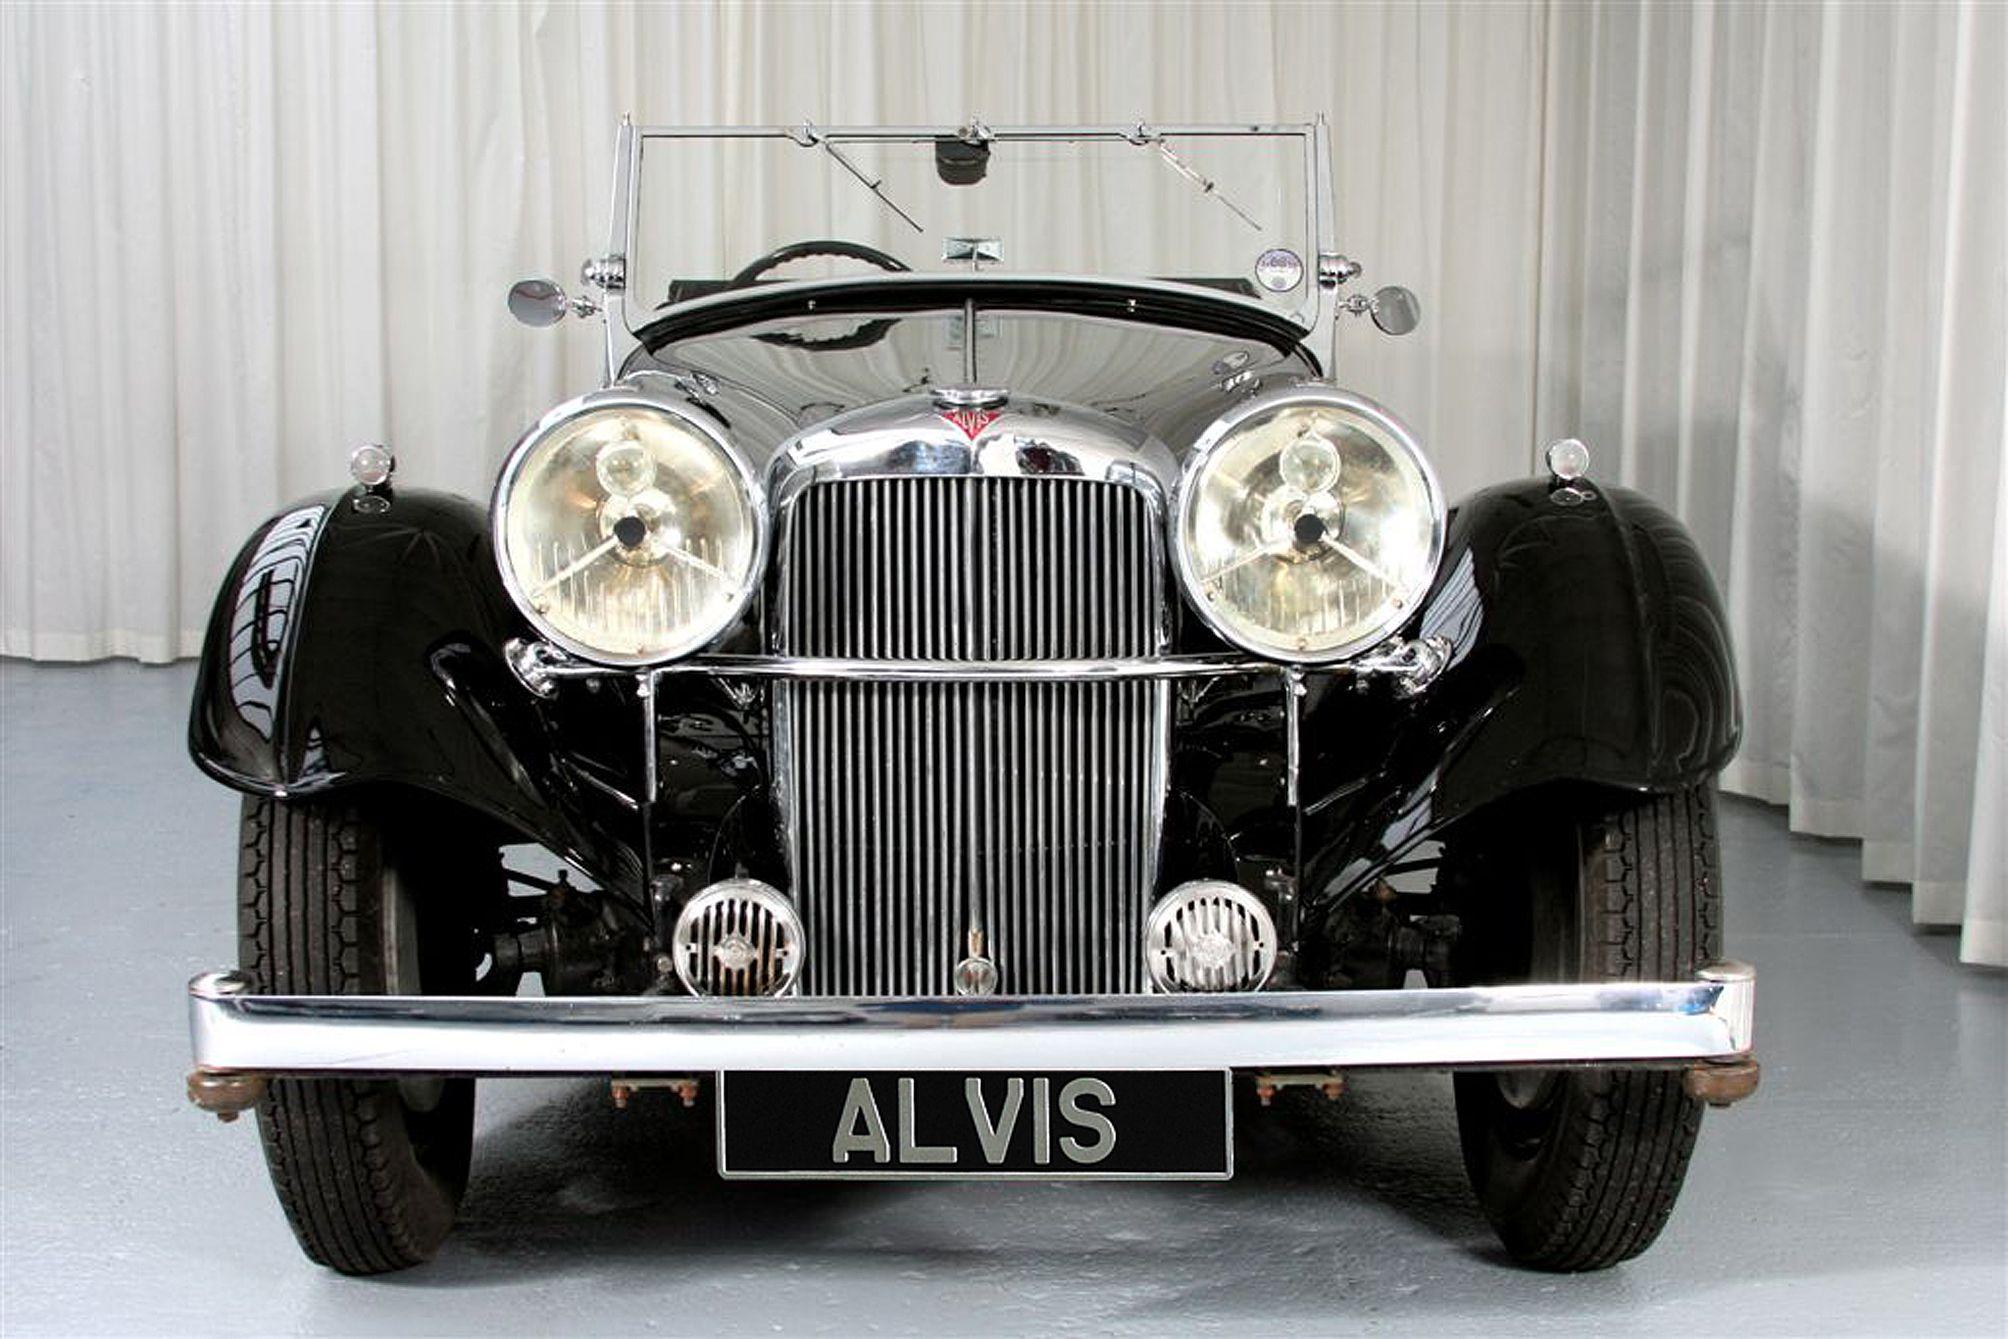 Silver Car with Red Triangle Logo - 1939sp25c - Red Triangle - Alvis Parts, Restoration and Car Sales